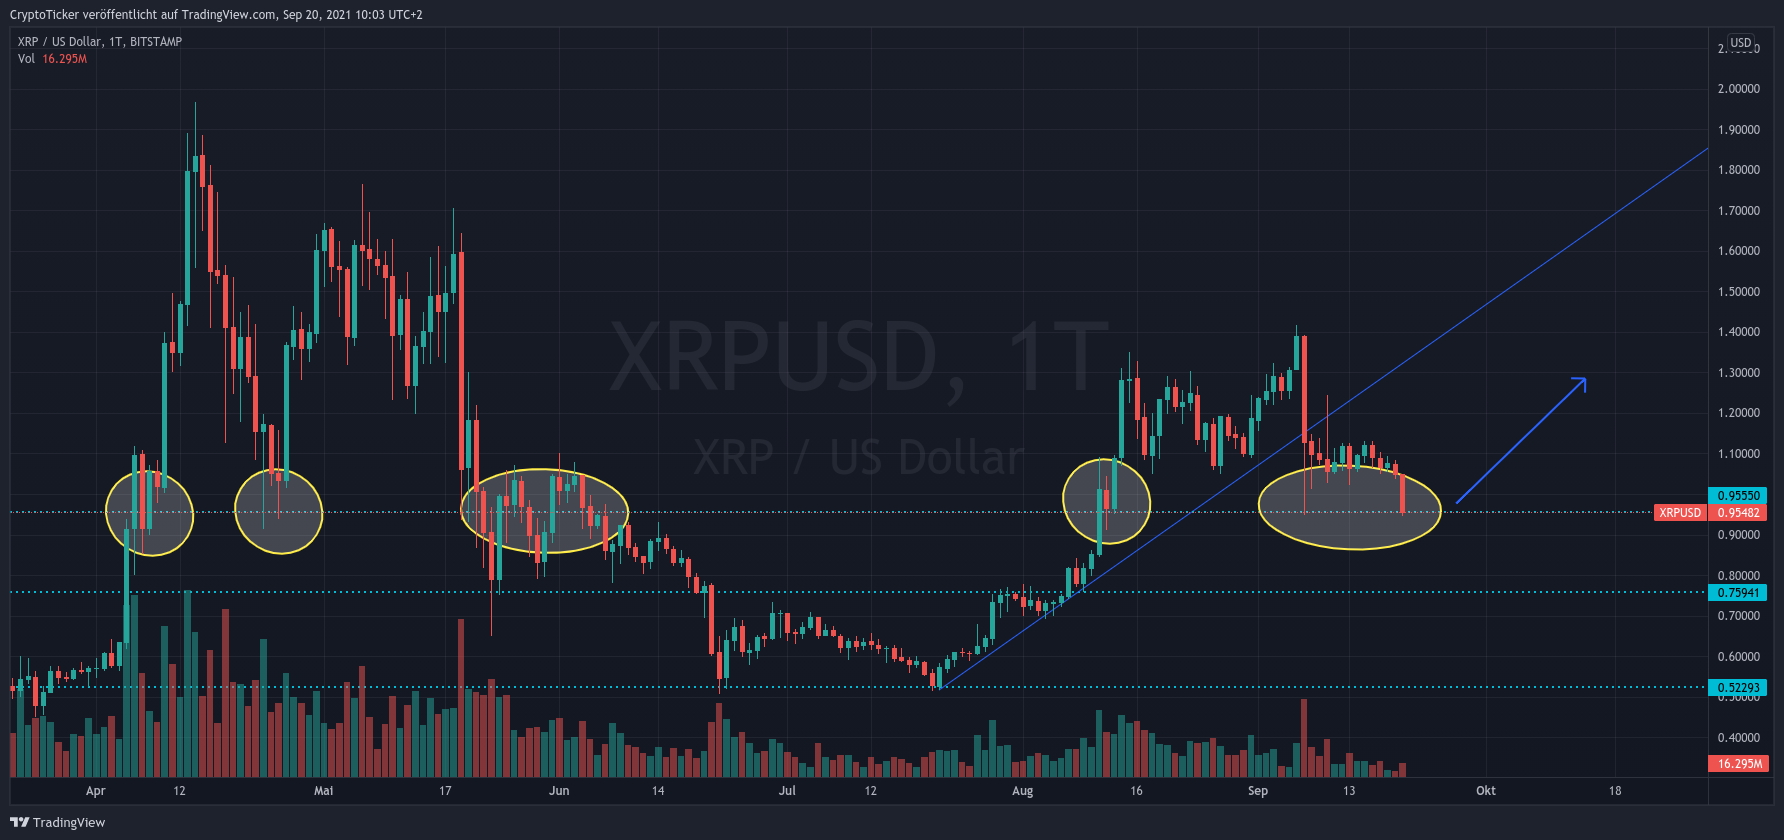 XRP/USD 1-day chart showing a scenario 1